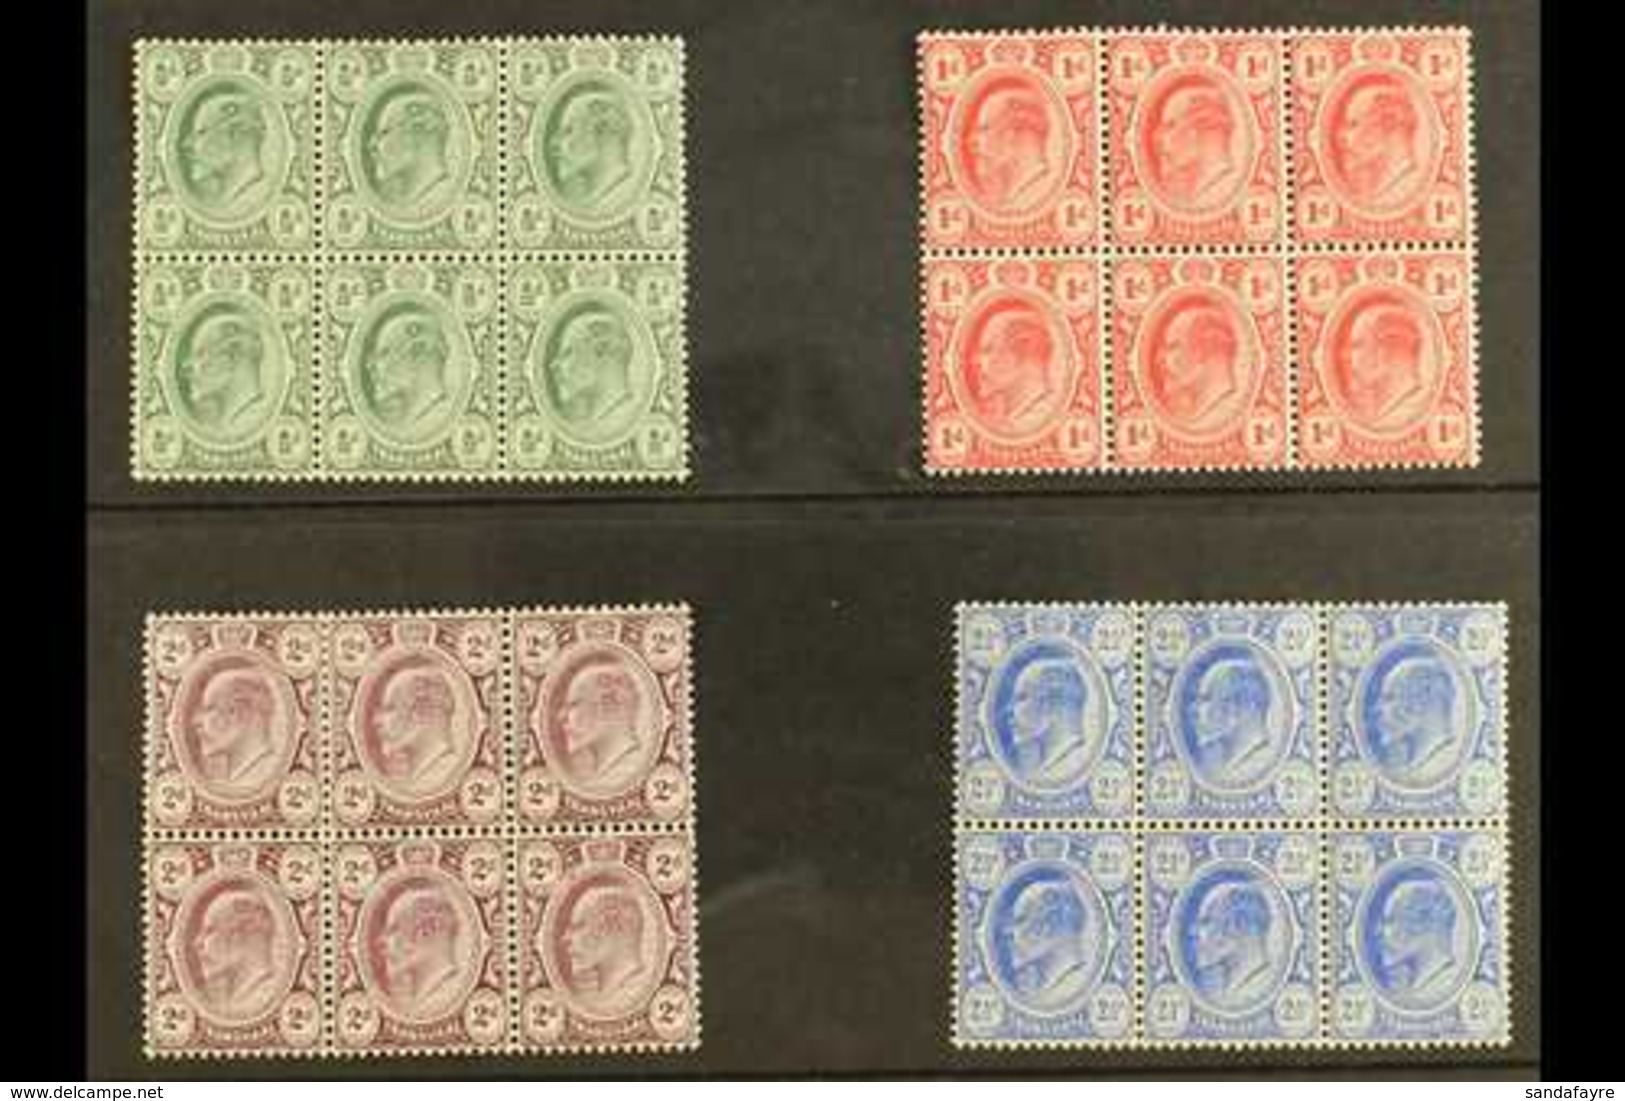 TRANSVAAL 1905-09 KEVII Set, SG 273/76, In Very Fine Mint BLOCKS OF SIX (3 X 2), At Least 4 Stamps In Each Block Never H - Unclassified